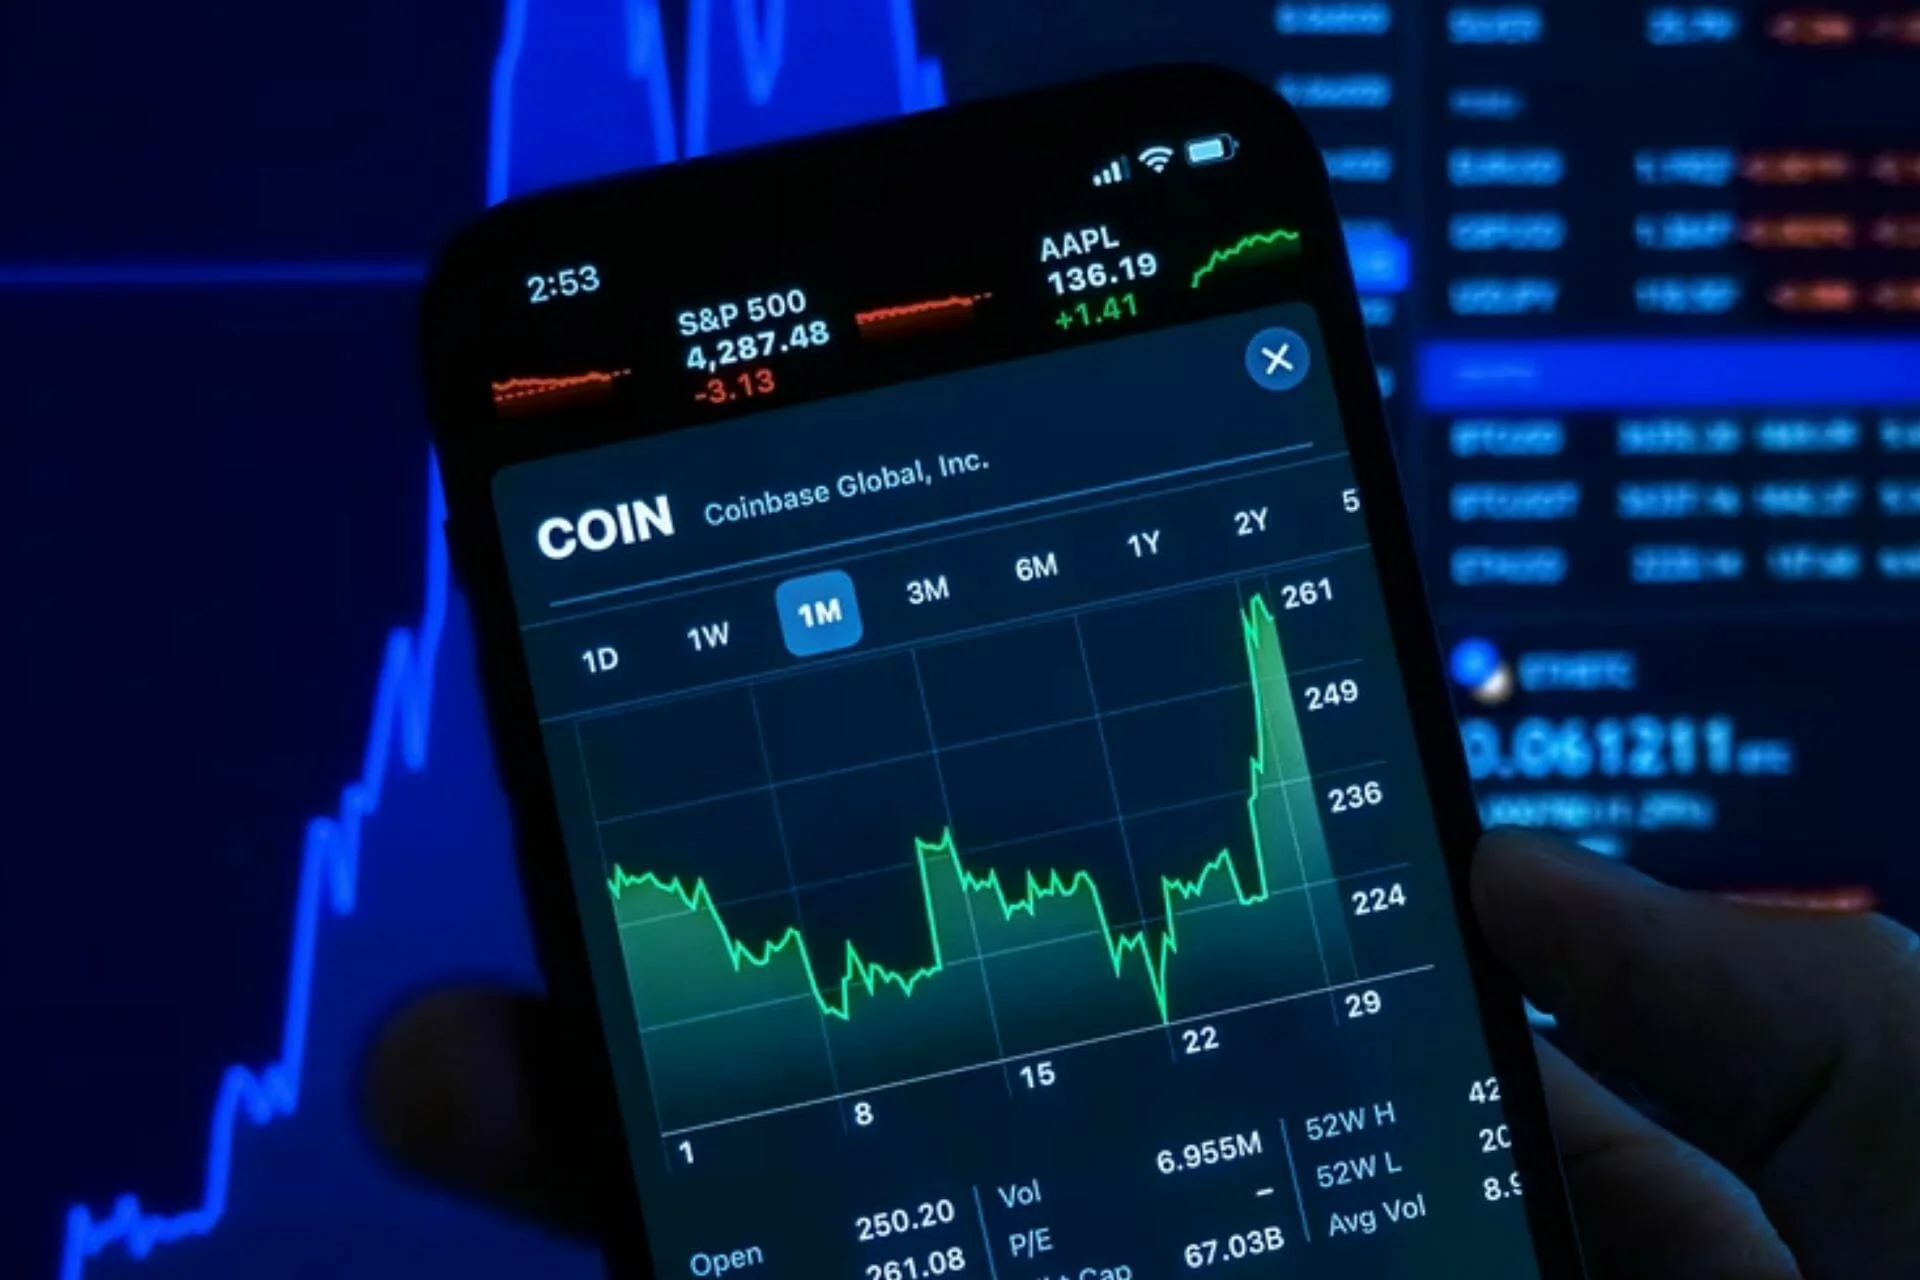 Buy Bitcoin From Best 5 Crypto Apps in 2022